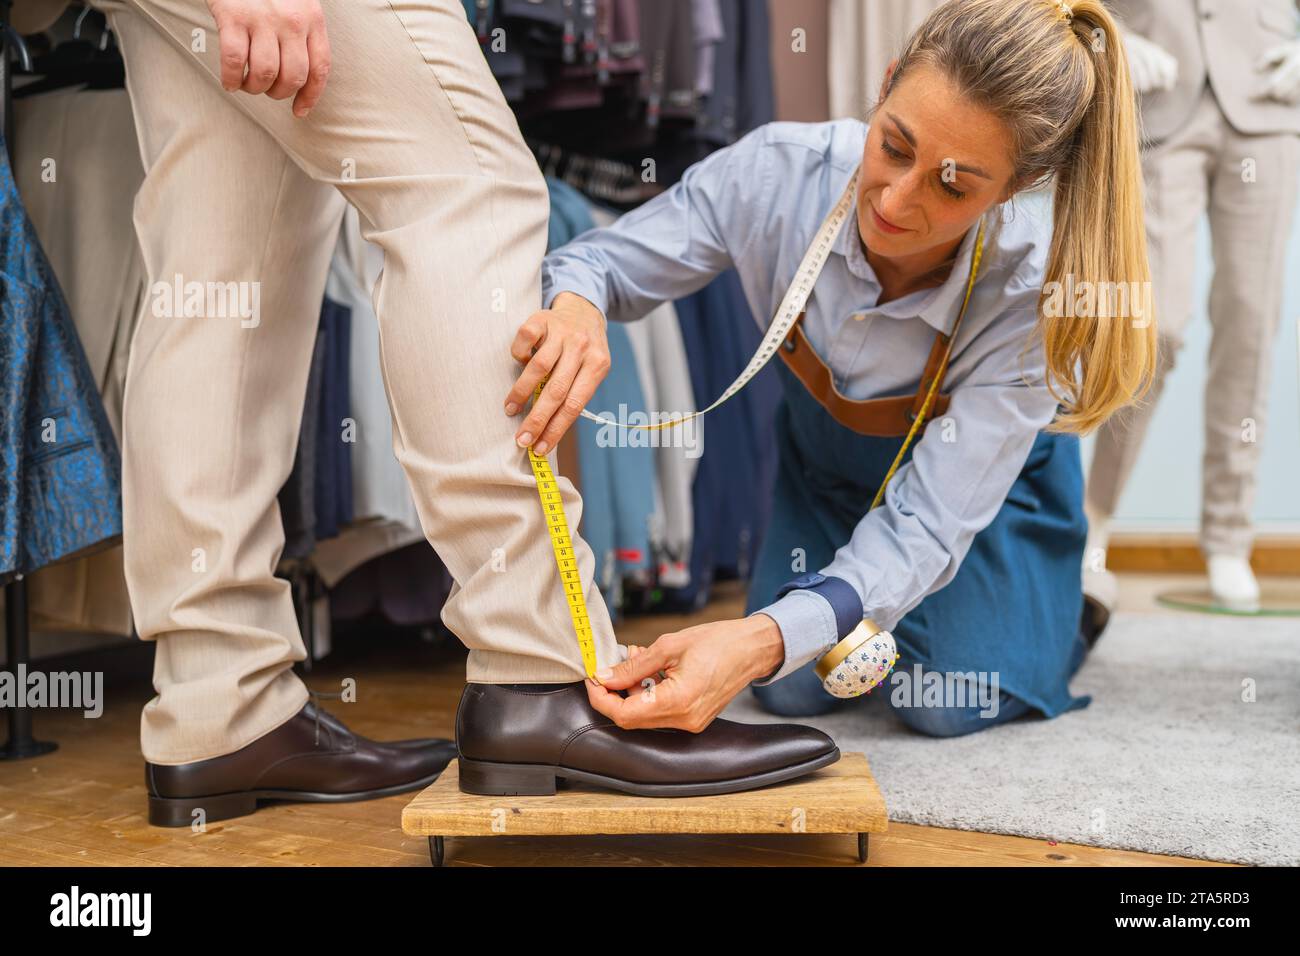 https://c8.alamy.com/comp/2TA5RD3/tailor-measures-mans-trouser-length-with-yellow-tape-at-shoe-level-at-a-wedding-store-2TA5RD3.jpg